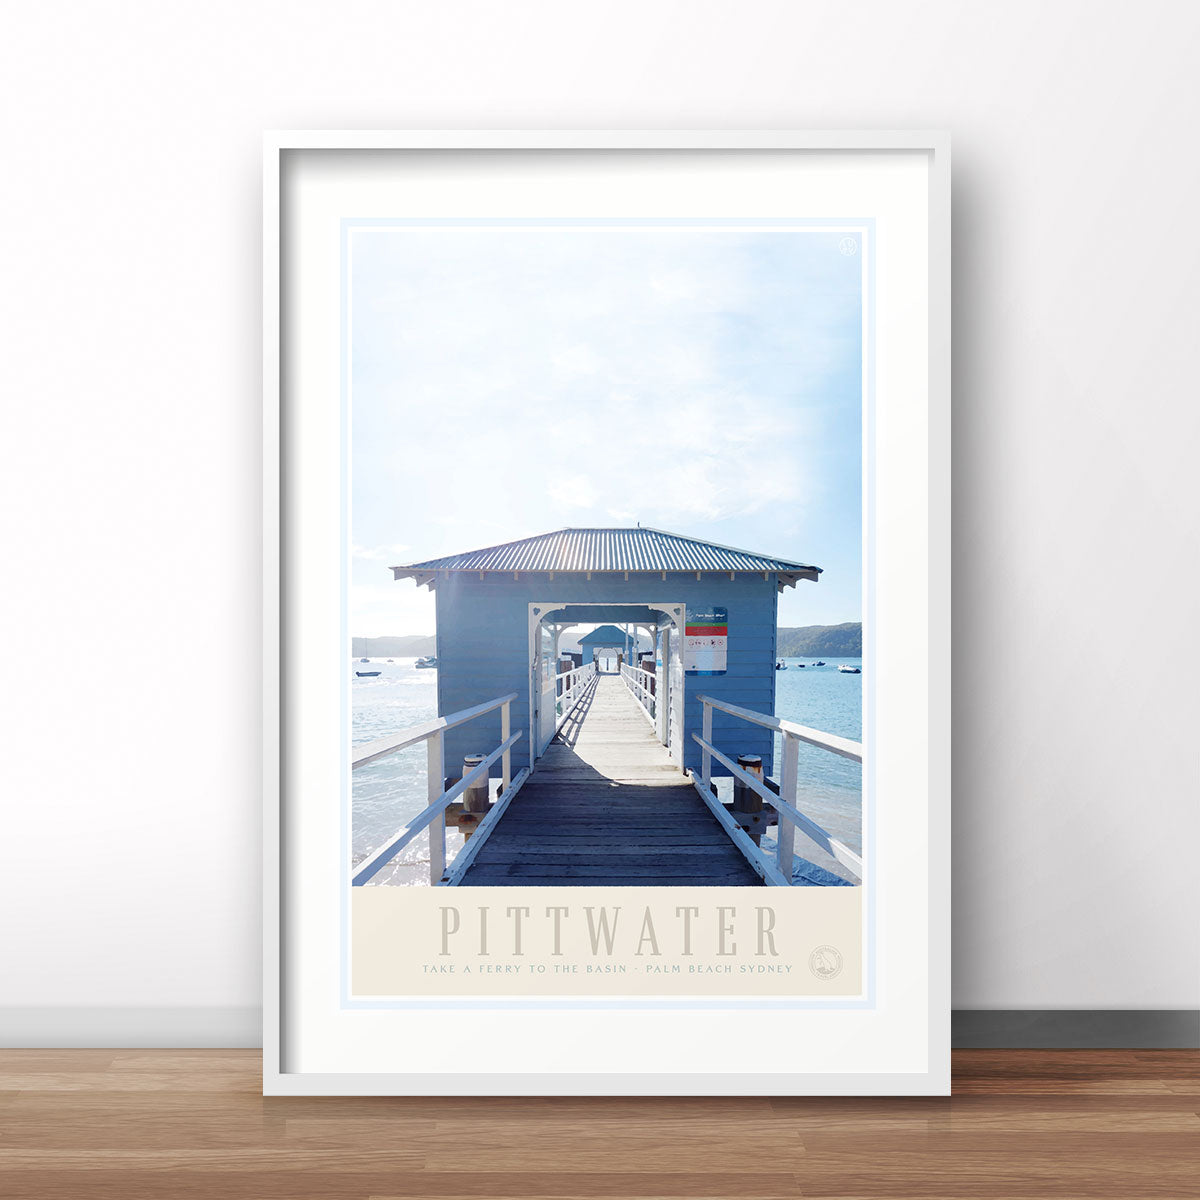 Pittwater Sydney Ferry print. Vintage retro travel poster print from Places We Luv